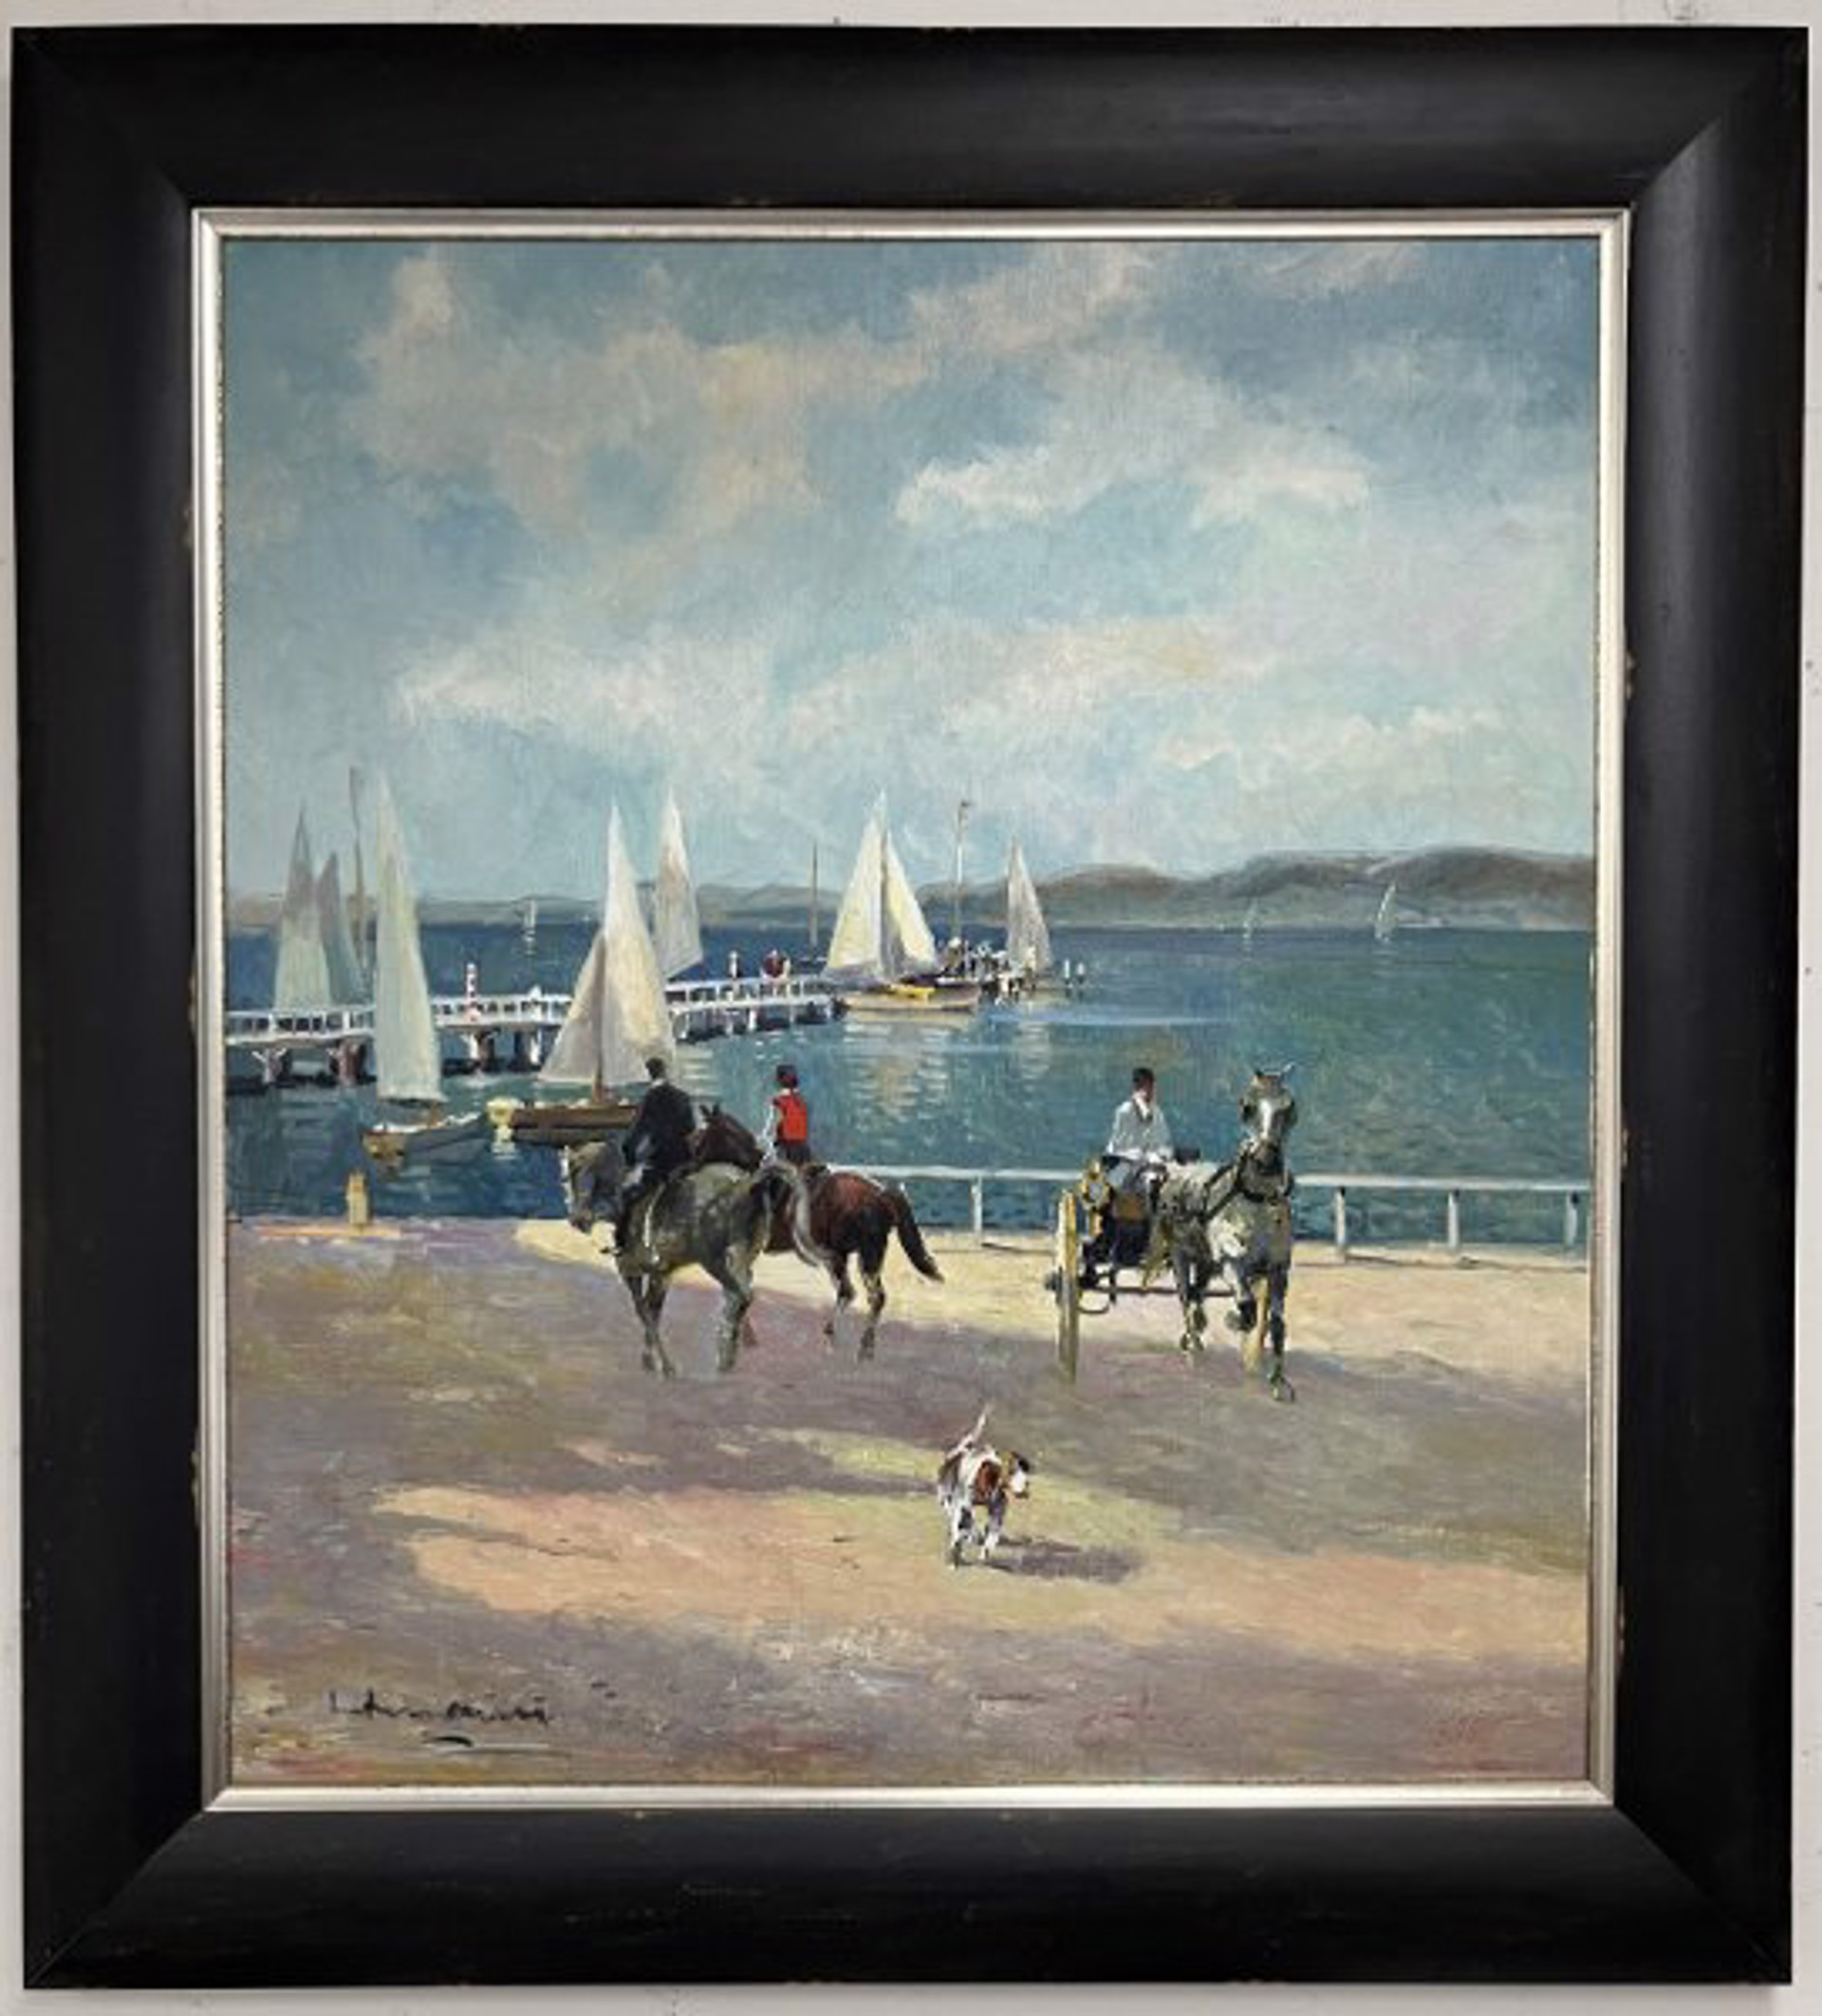 Summer Beach Scene with Horse Drawn Carriage, Horseback Ridders and Dog by Ludwig Gschossmann